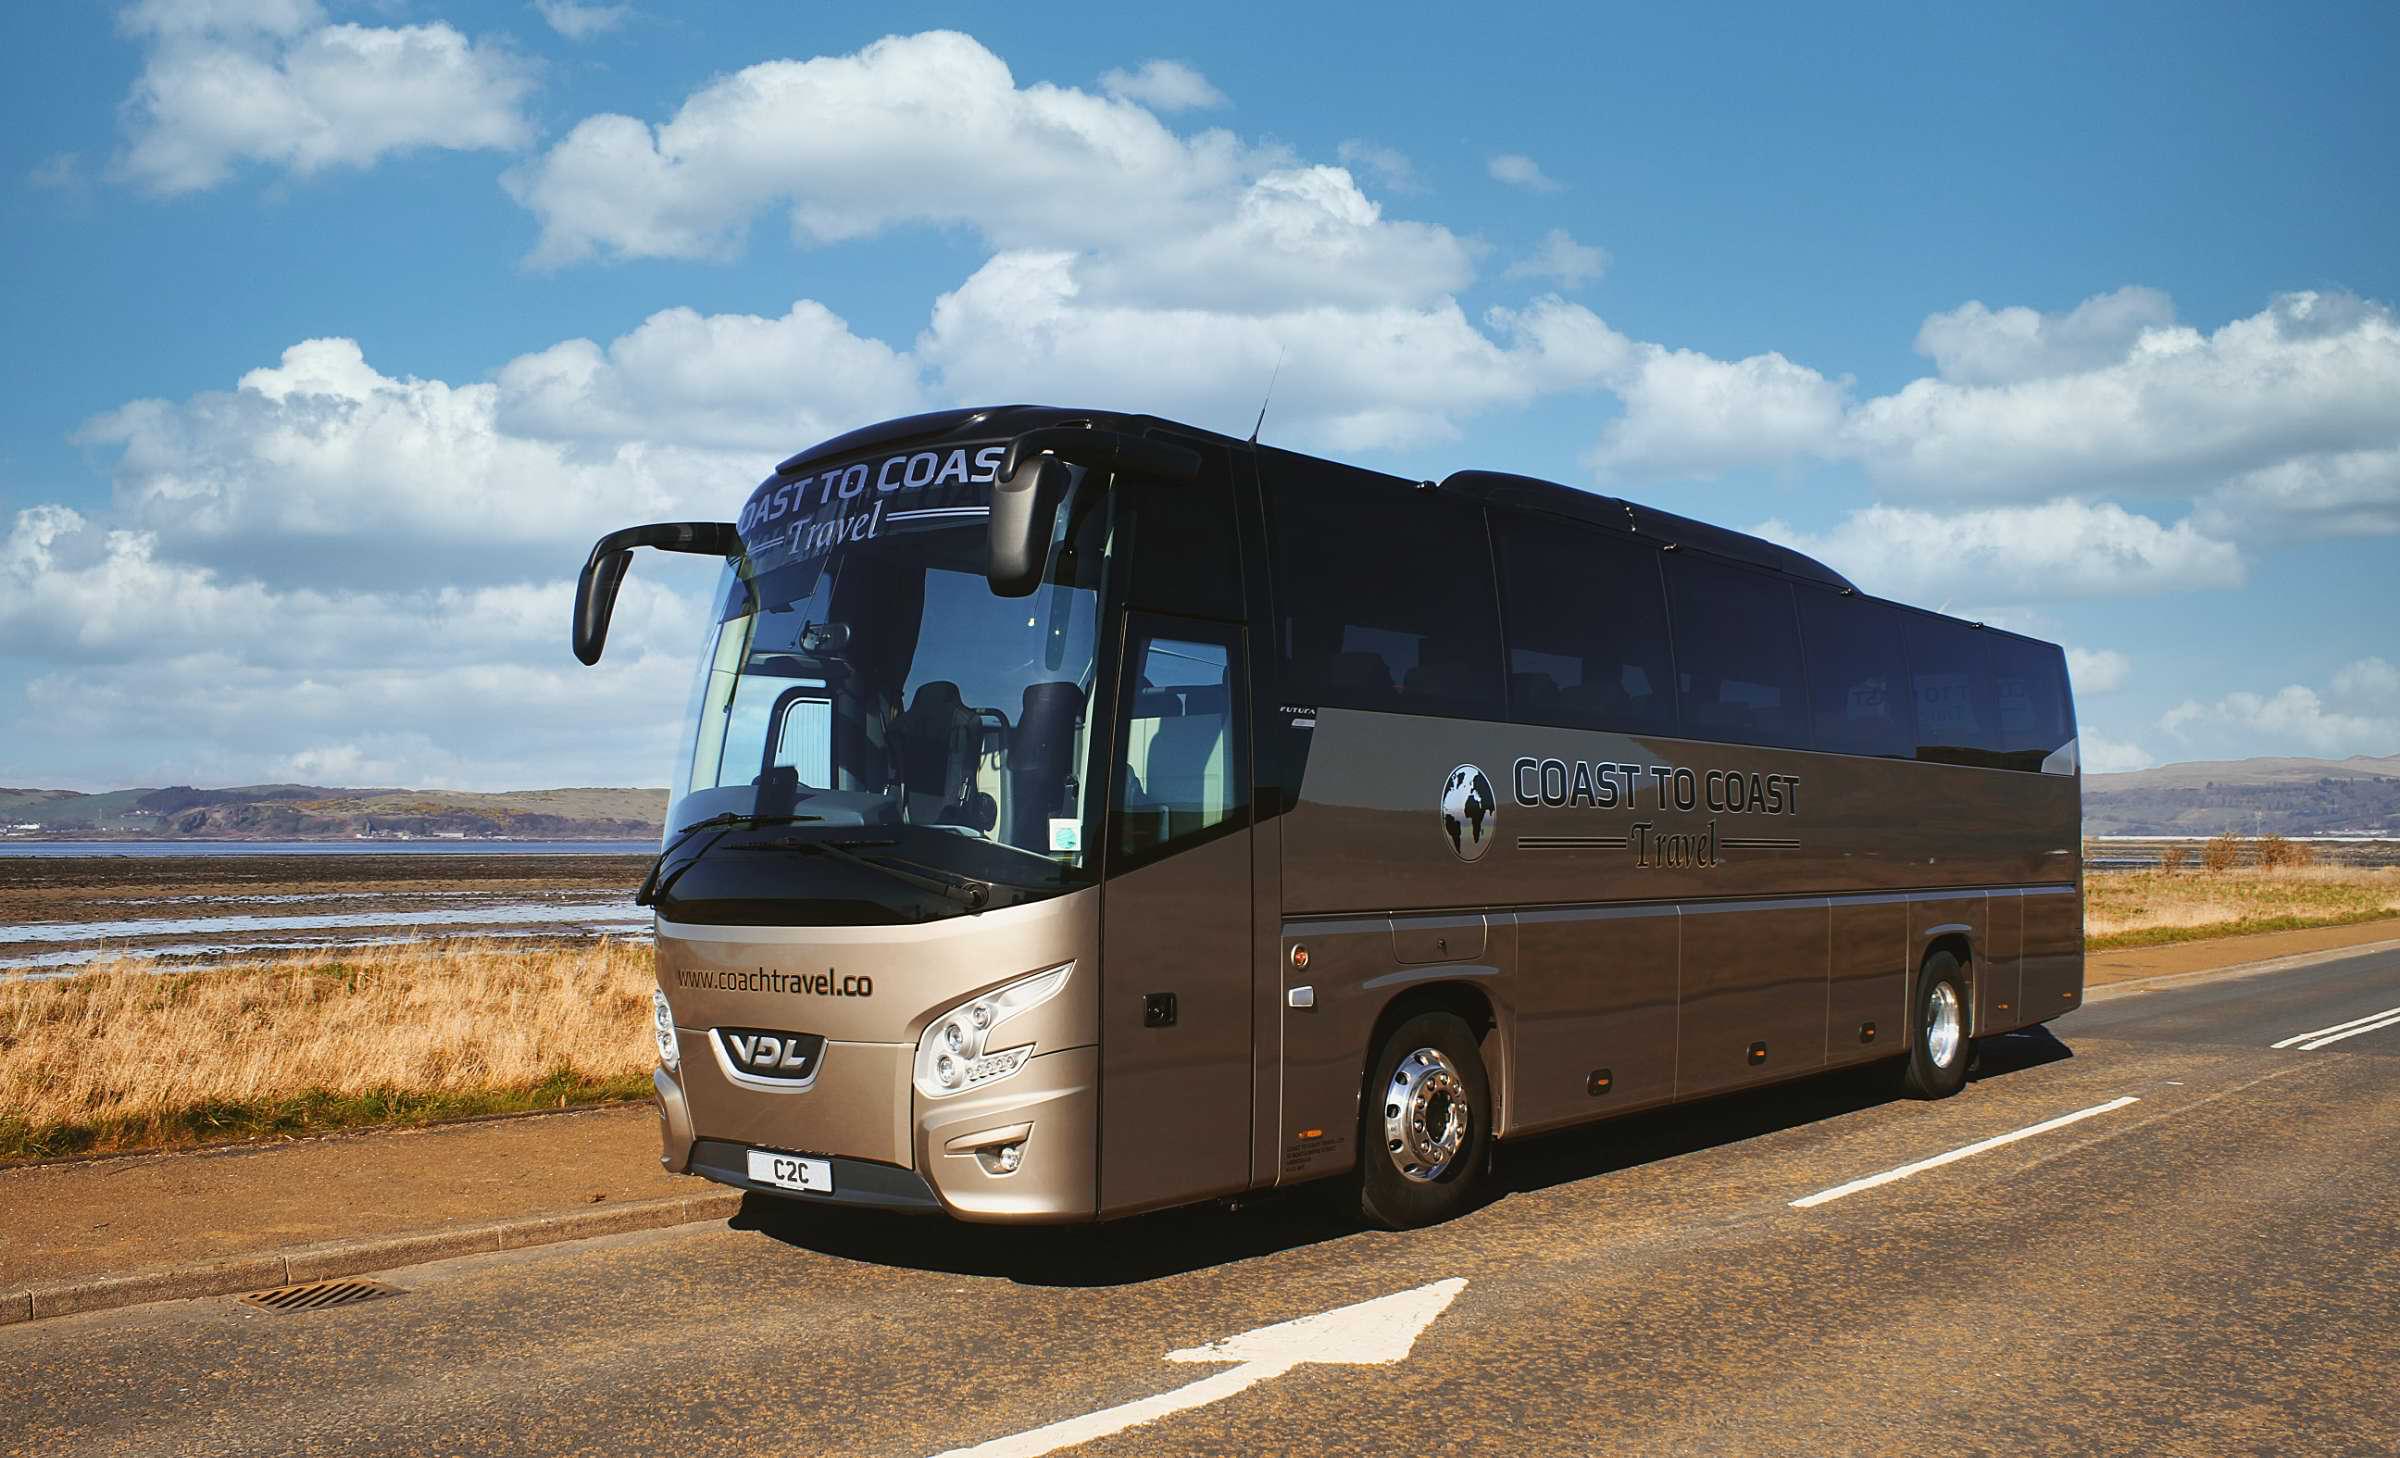 Side view of Coast to Coast Travel coach, parked at the roadside with some low hills in the background